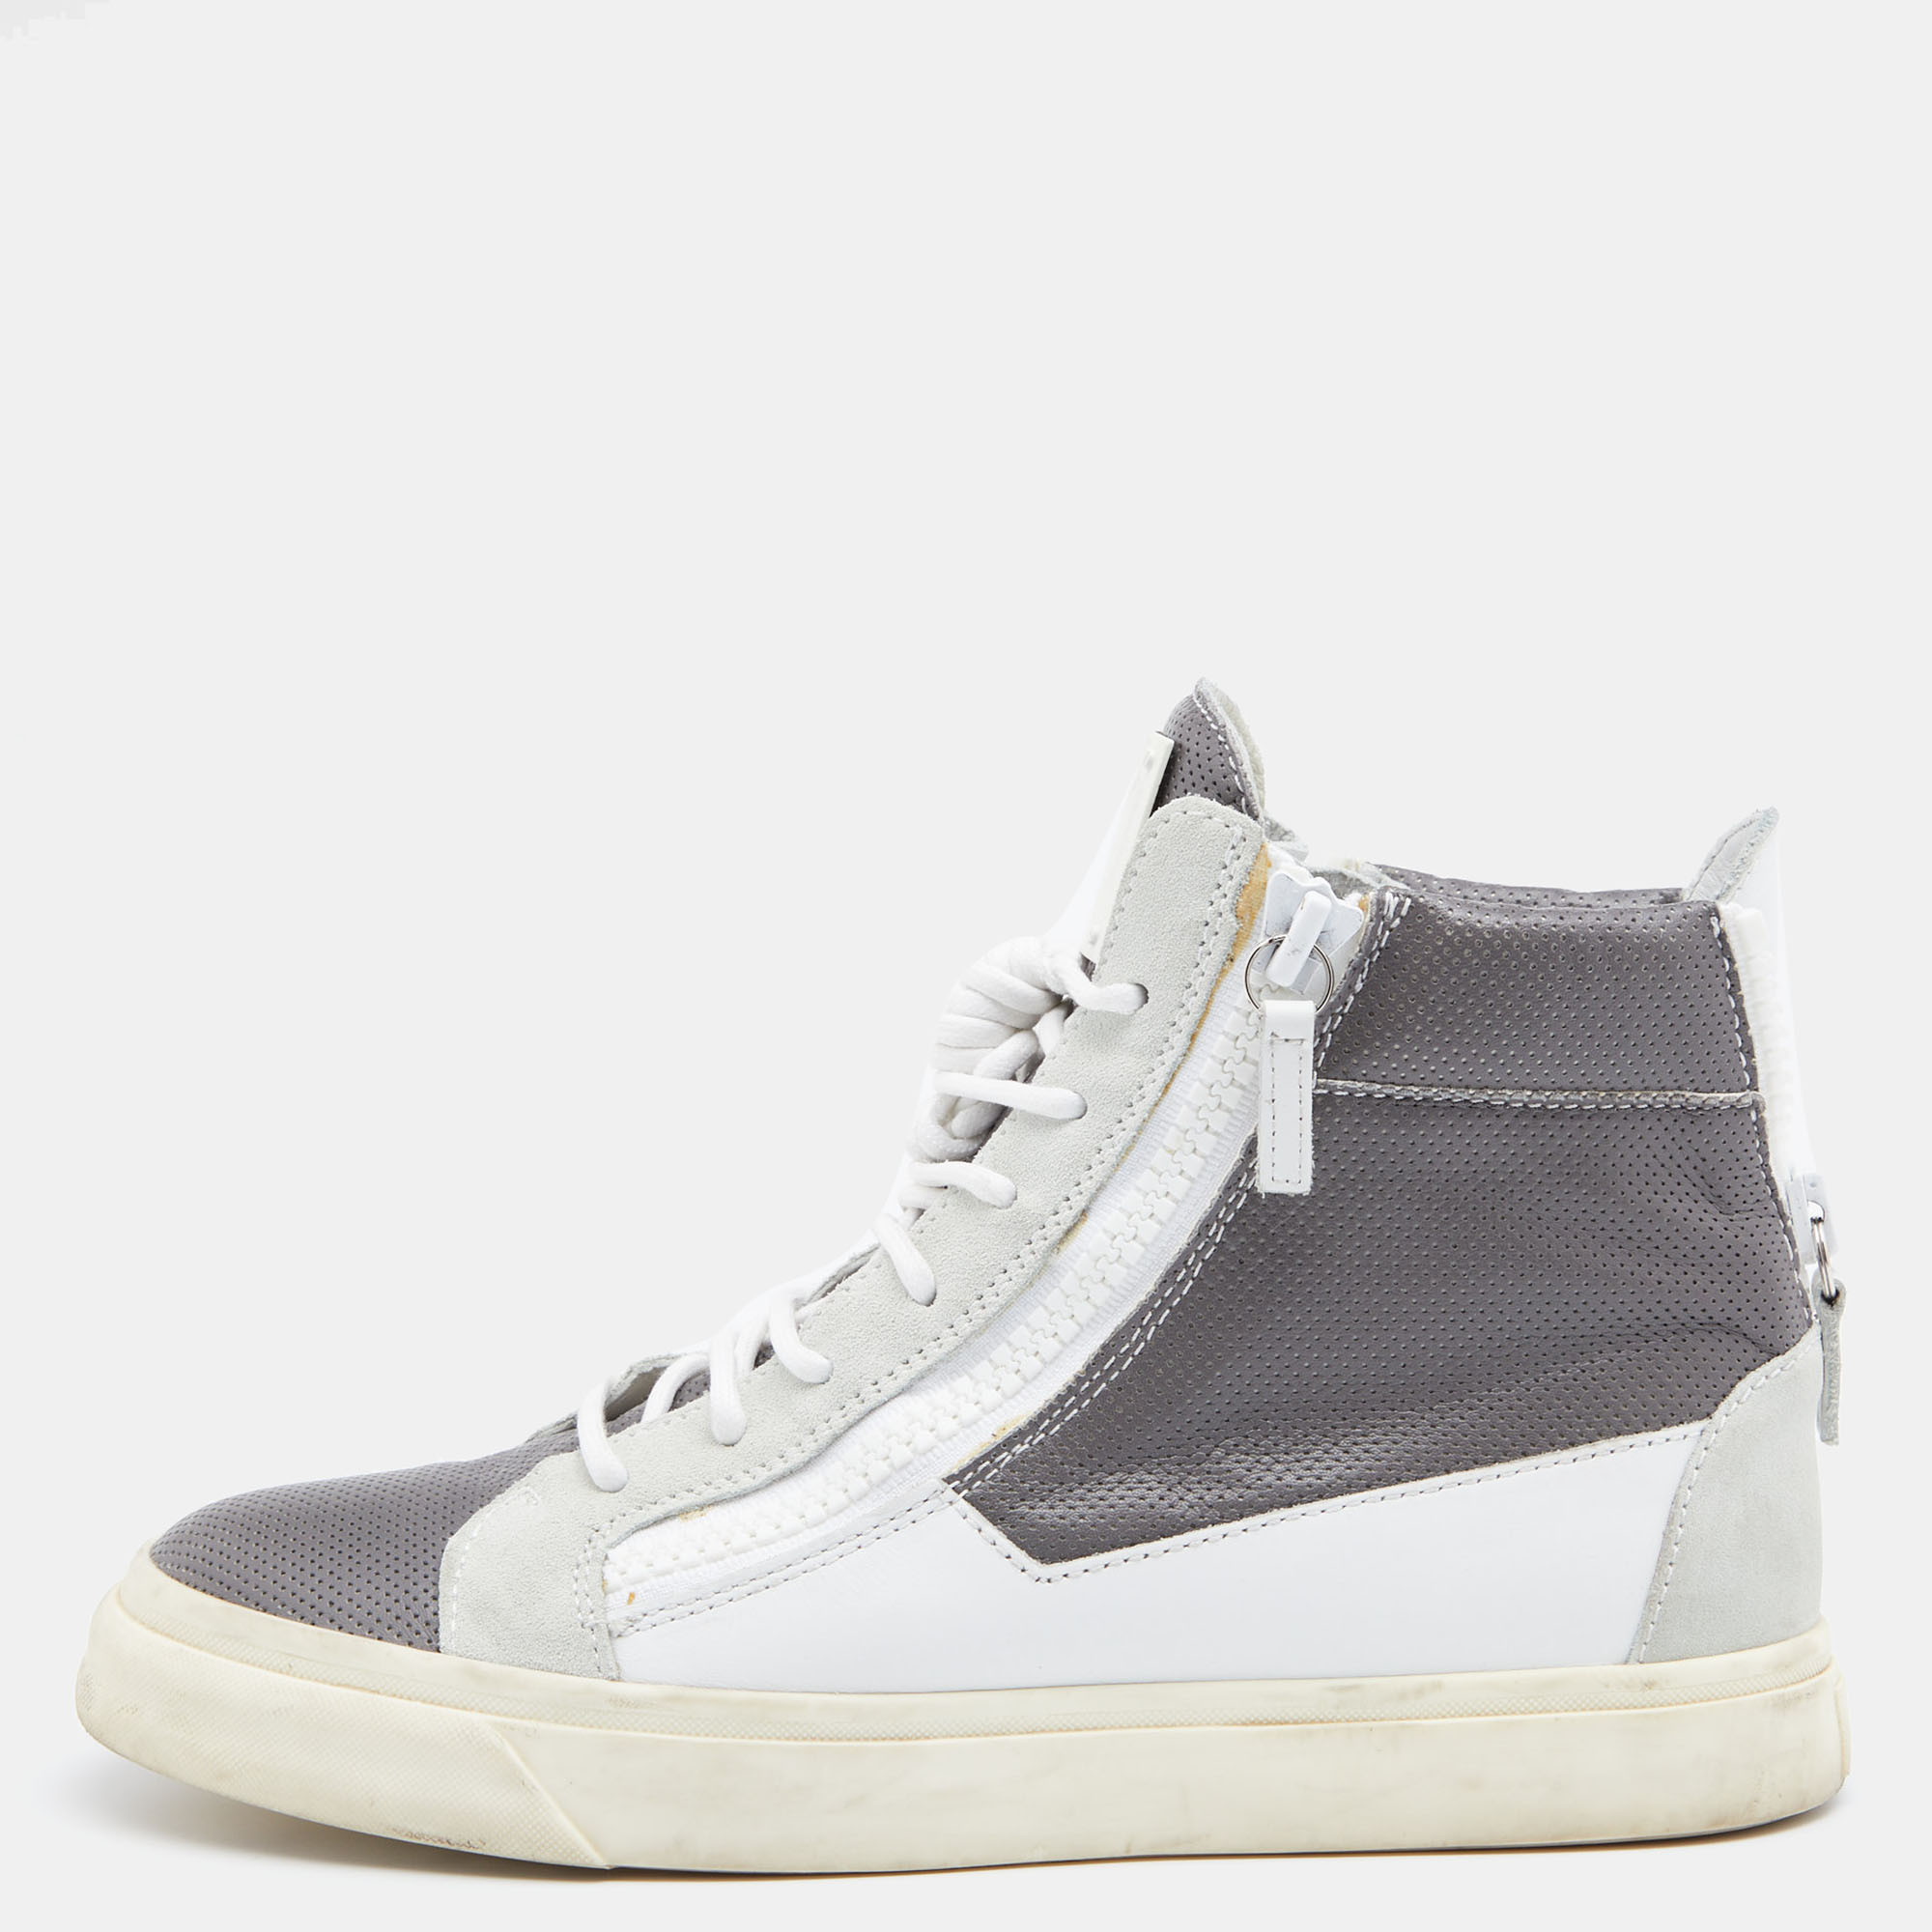 

Giuseppe Zanotti Grey/White Perforated Leather And Suede Double Zip High Top Sneakers Size